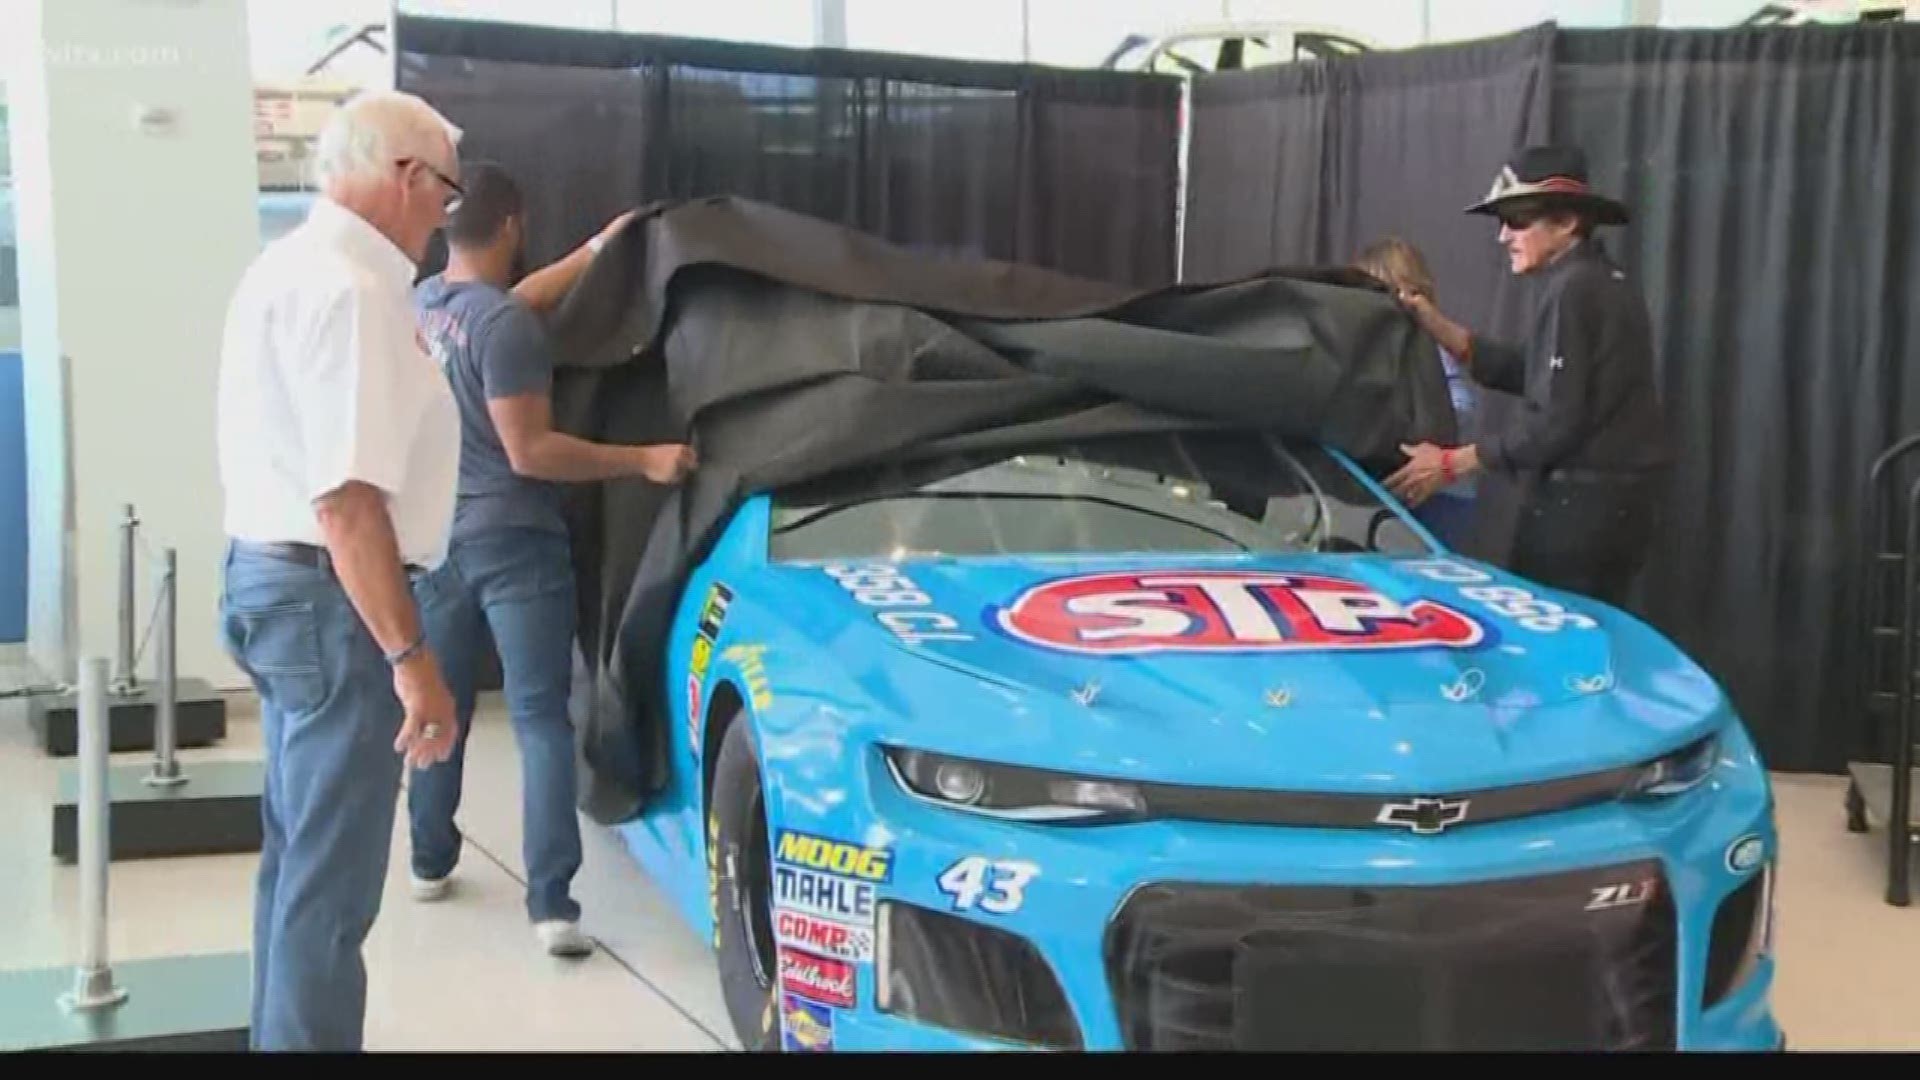 The NASCAR Hall of Fame which honors the sport's rich history is where the Richard Petty Motorsports unveiled the throwback paint scheme that will be run in the upcoming Bojangles Southern 500.